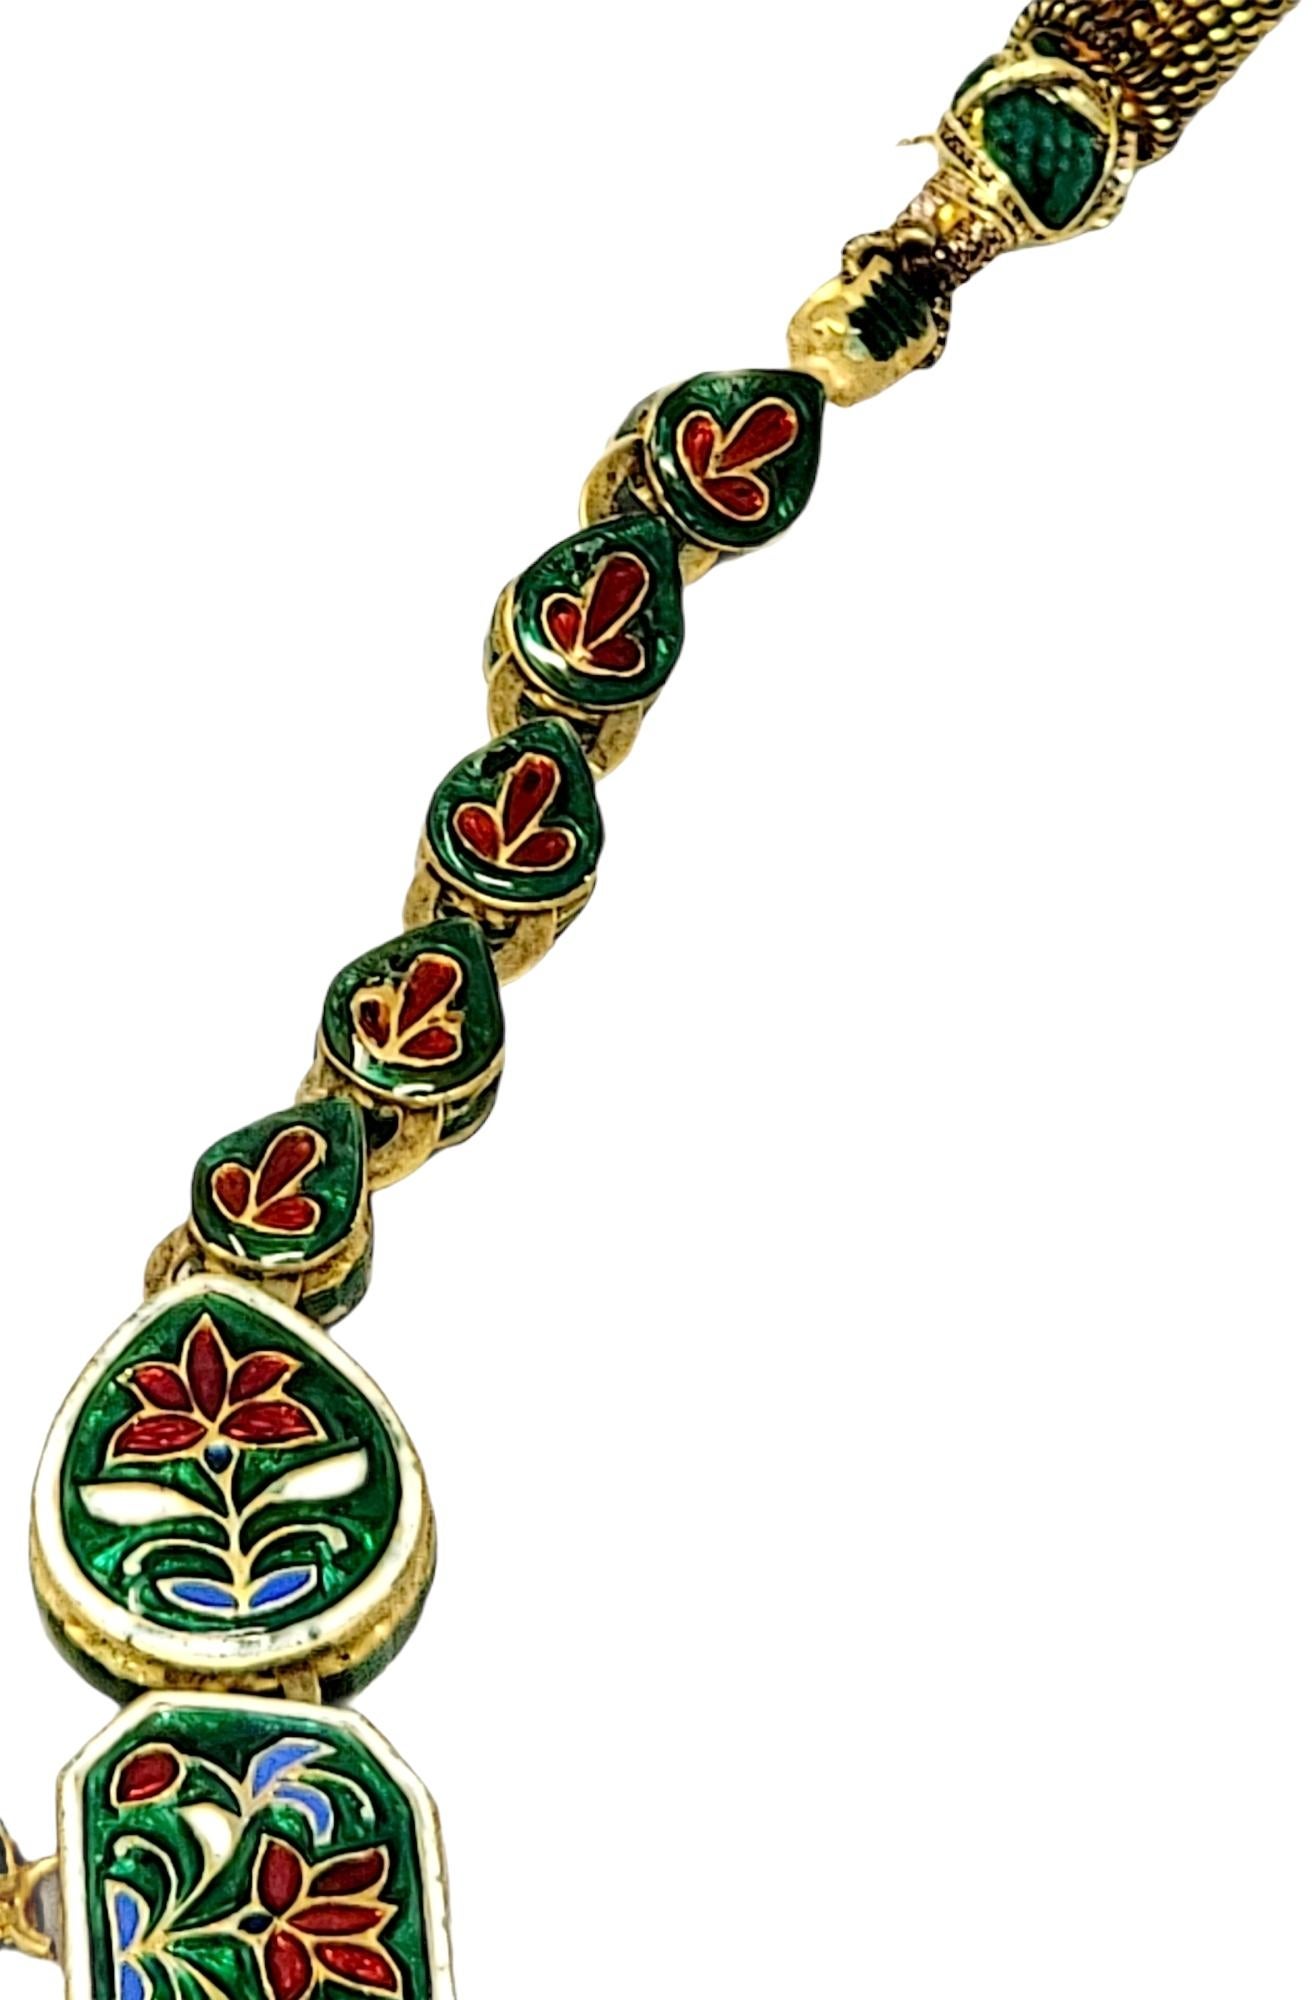 Vintage Hand Made Uncut Diamond Polki Green Necklace in 18 Karat Yellow Gold In Good Condition For Sale In Scottsdale, AZ